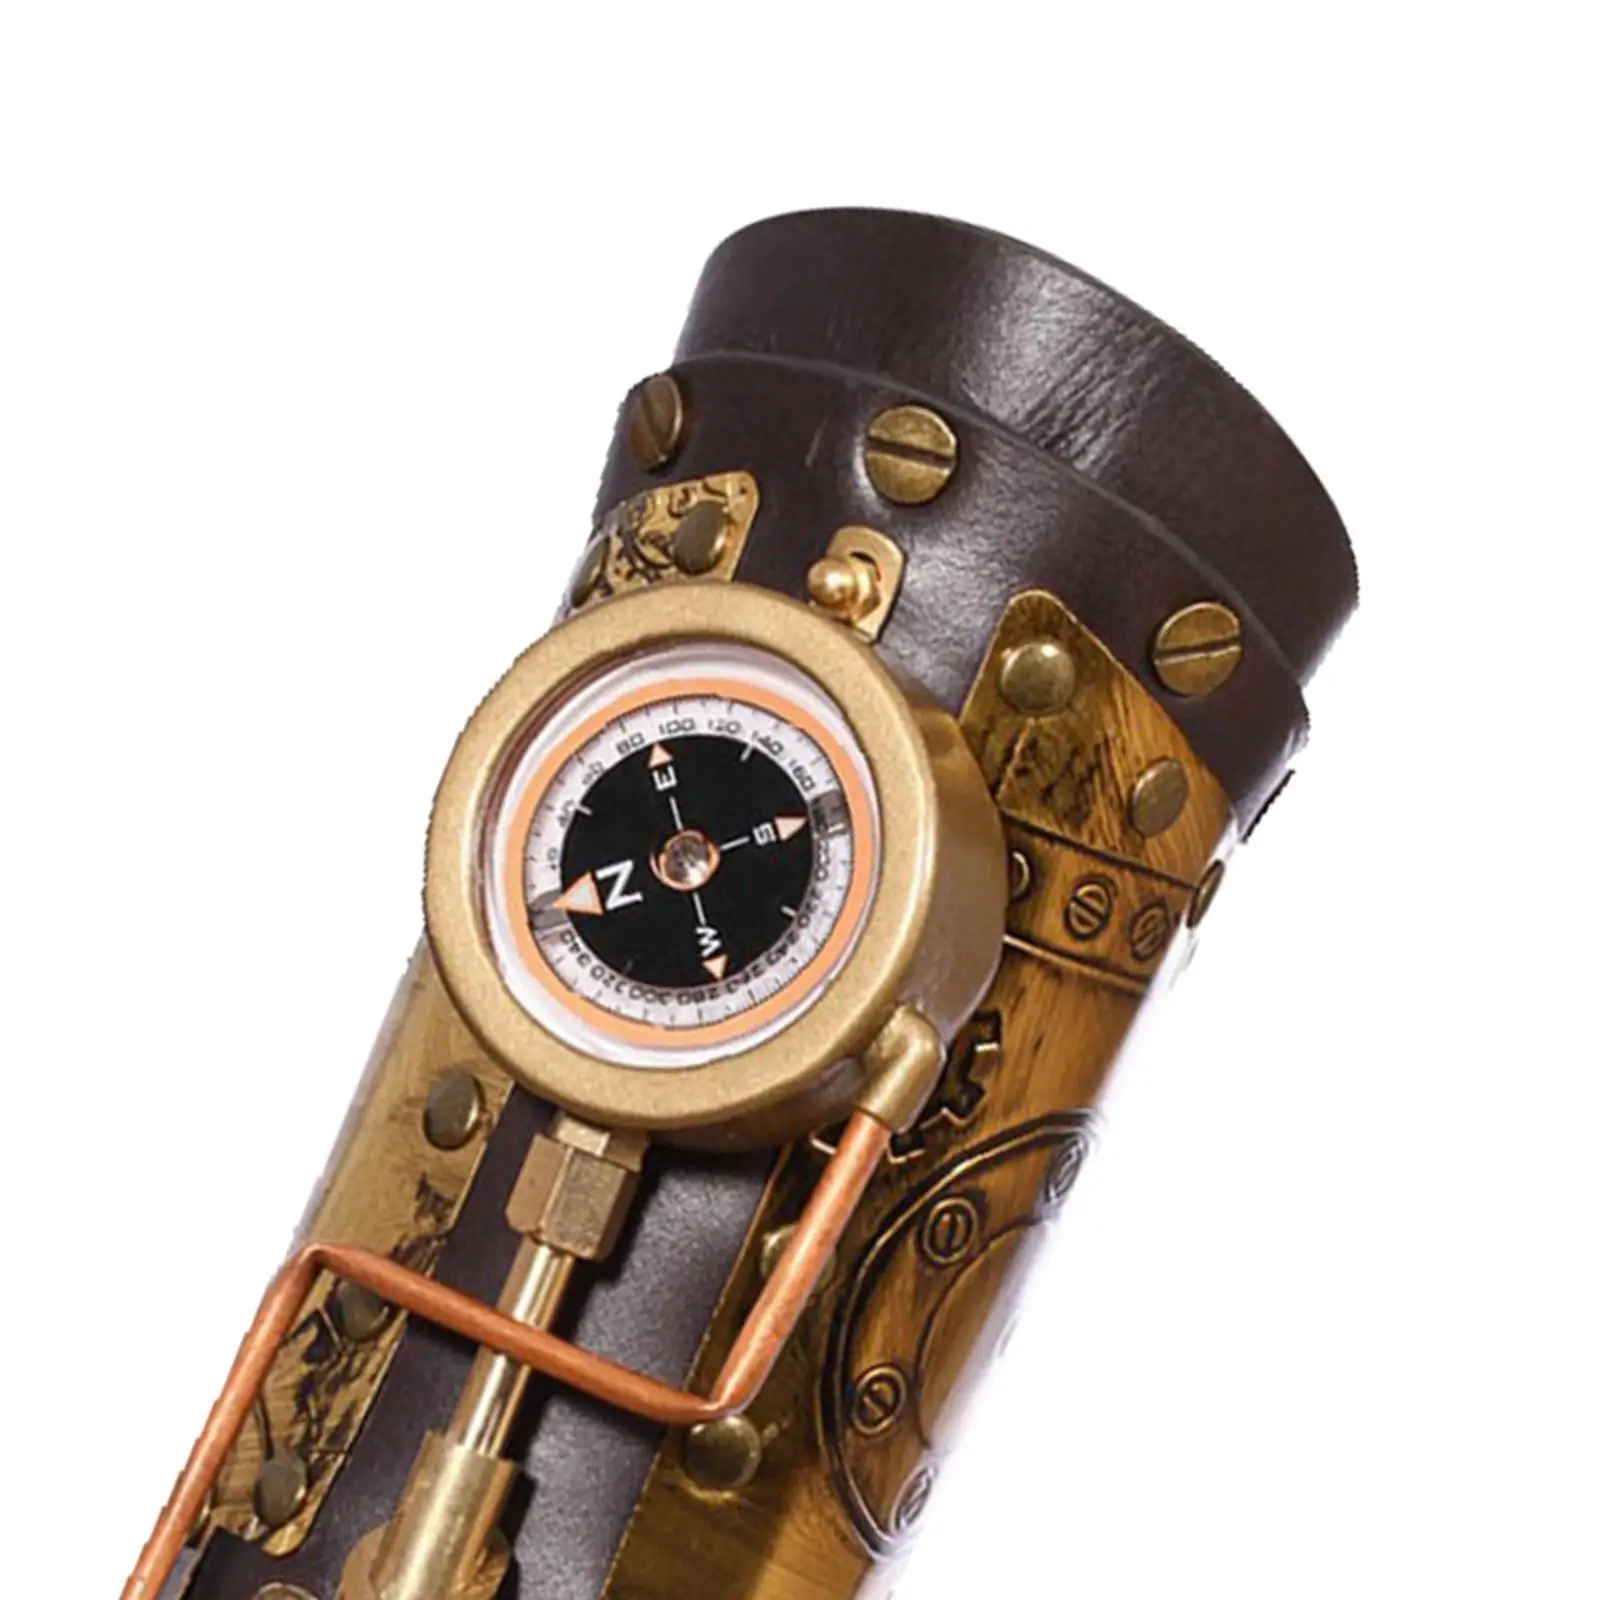 Steampunk Arm Sleeve with Compass Handmade Decorative Gothic Armor Gear Cuff for Cosplay Role Playing Theme Party Rave Halloween